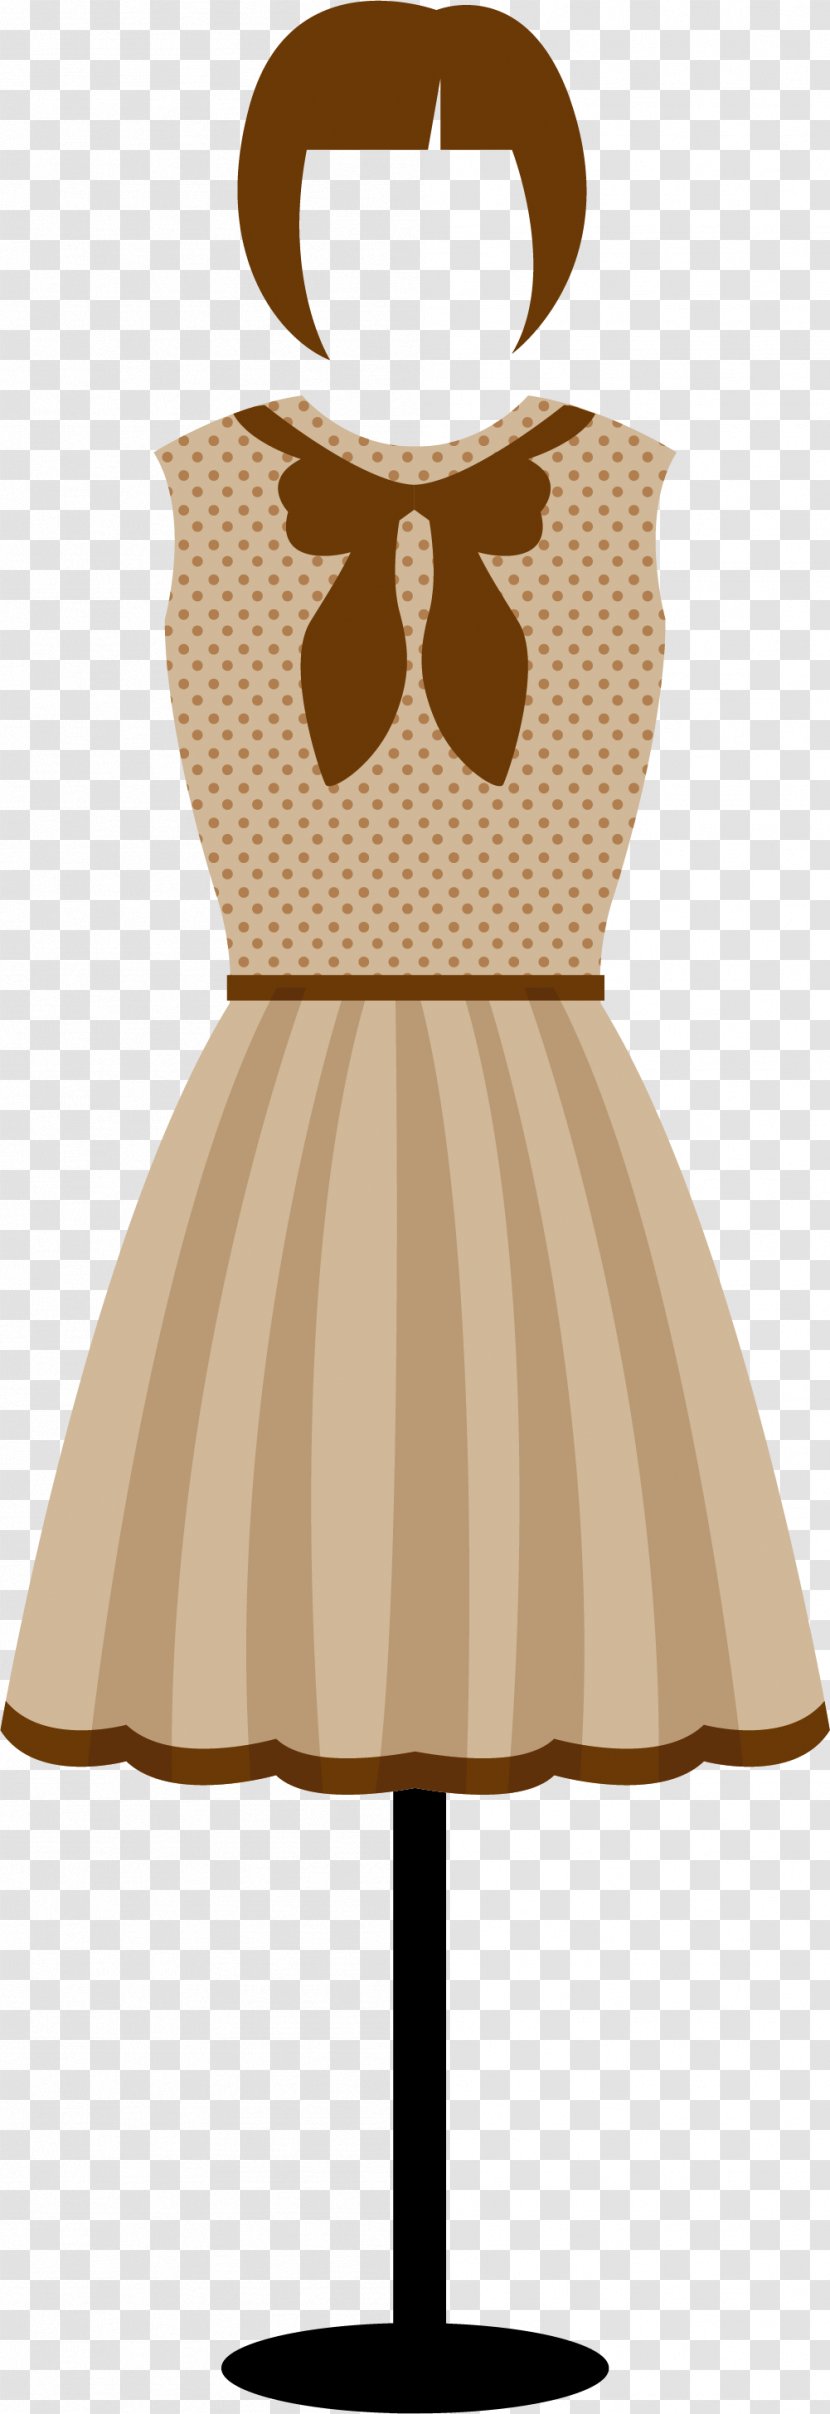 Middle Ages Old Age - Aged Dress Transparent PNG